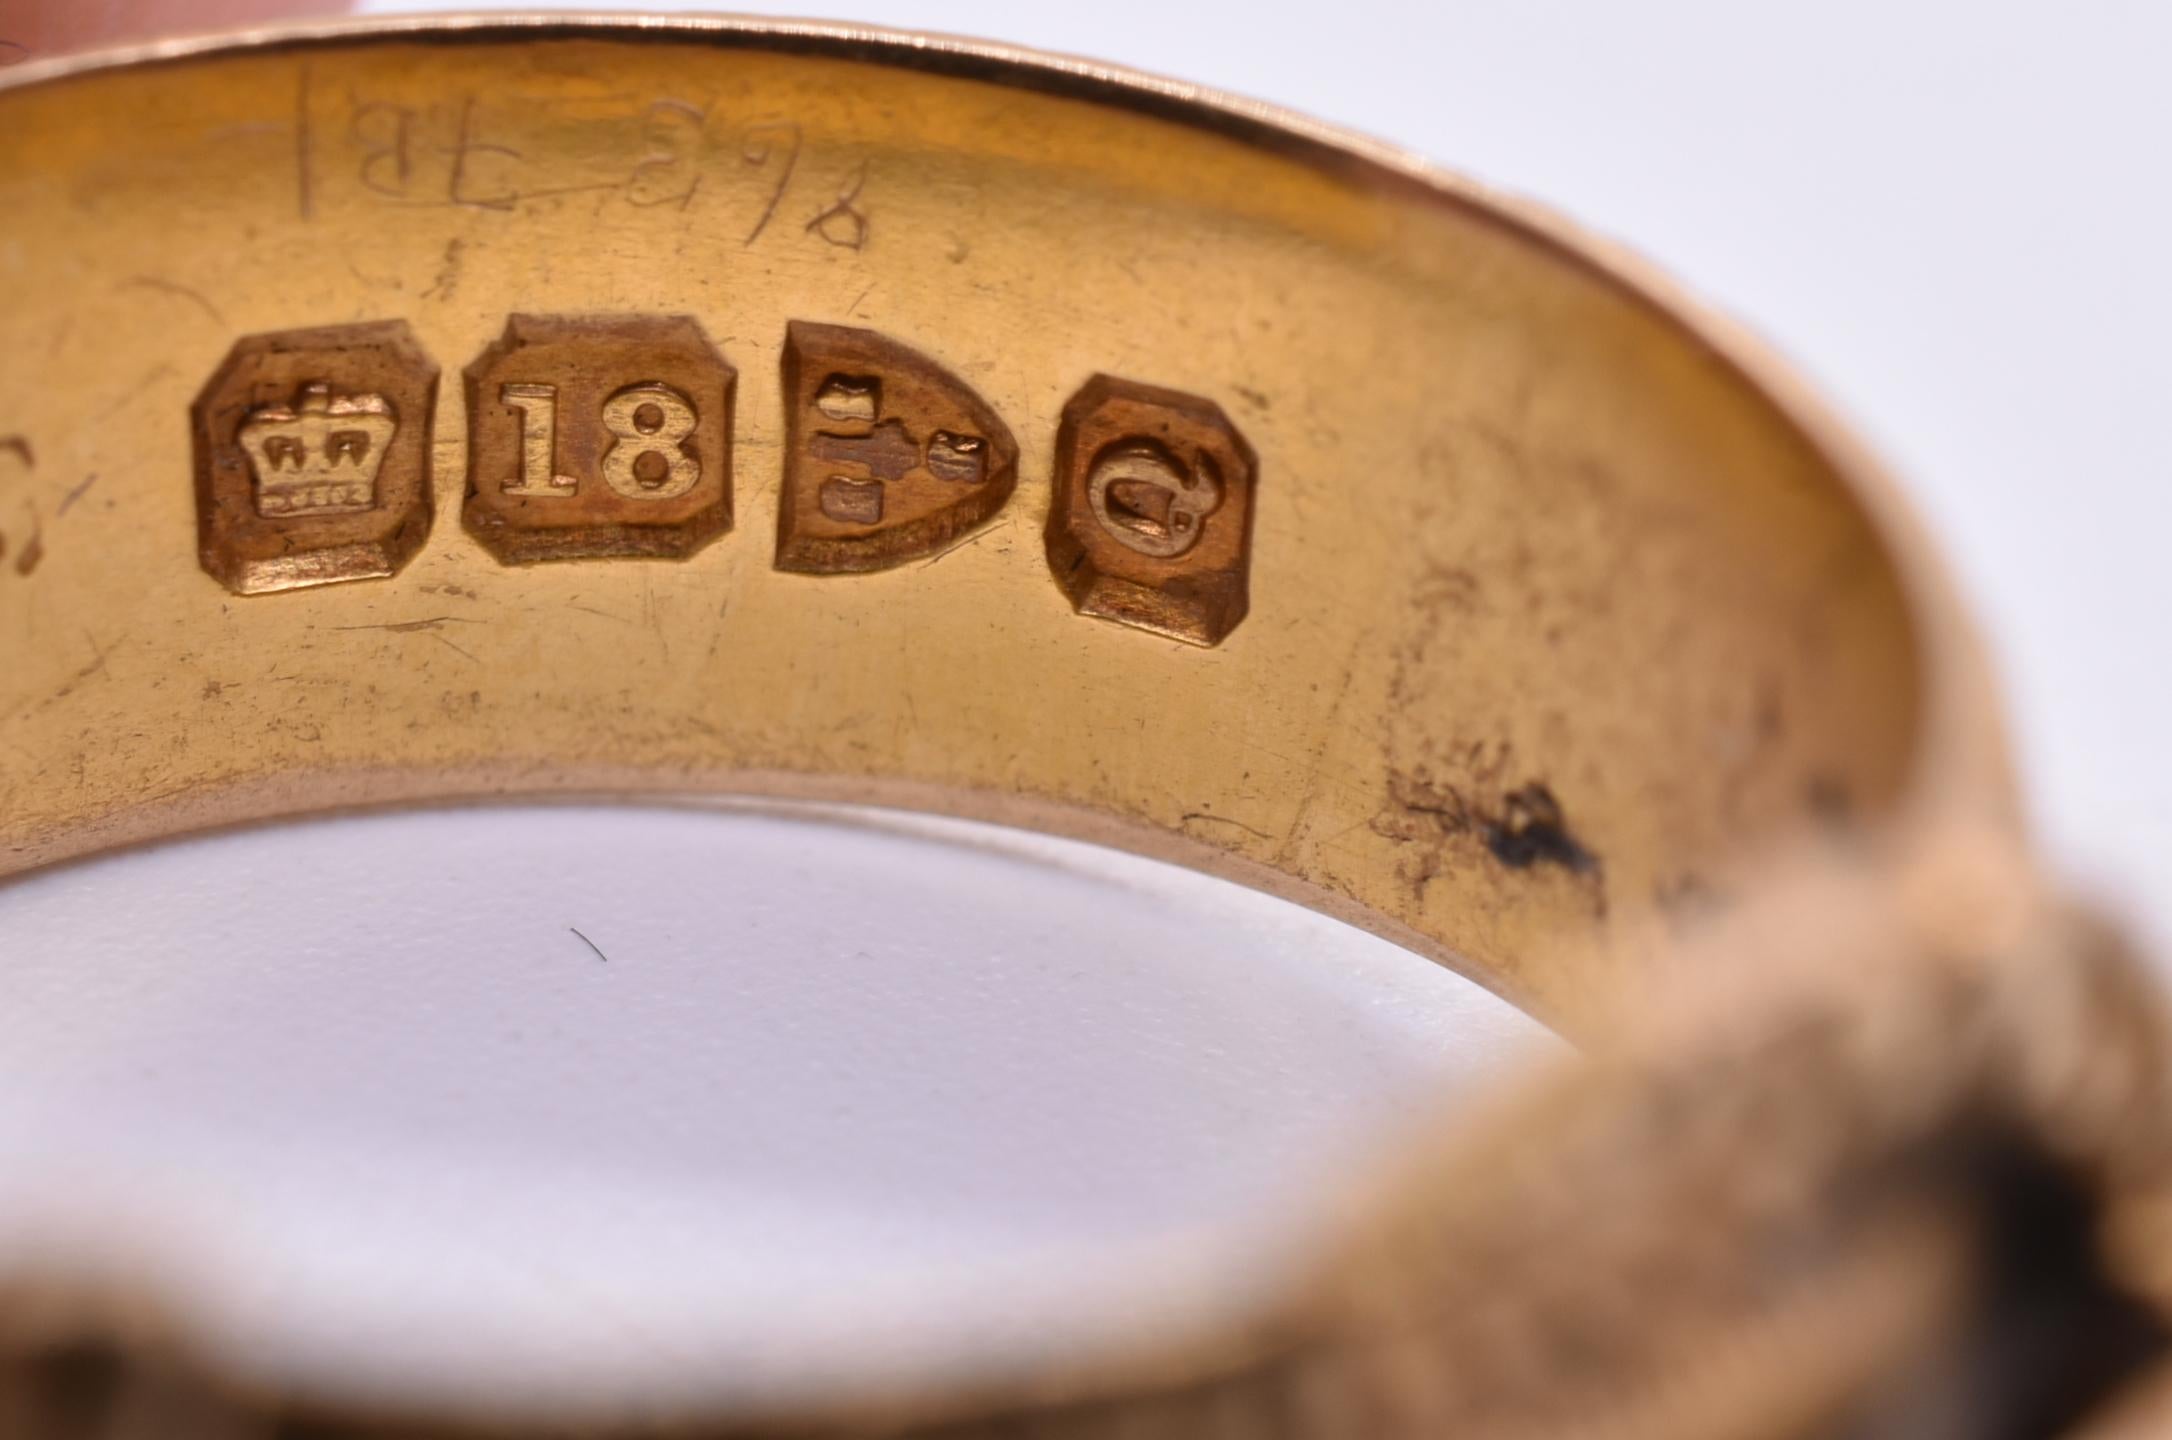 Gold Buckle Ring with Diamonds and Repousse Border HM 1899 4